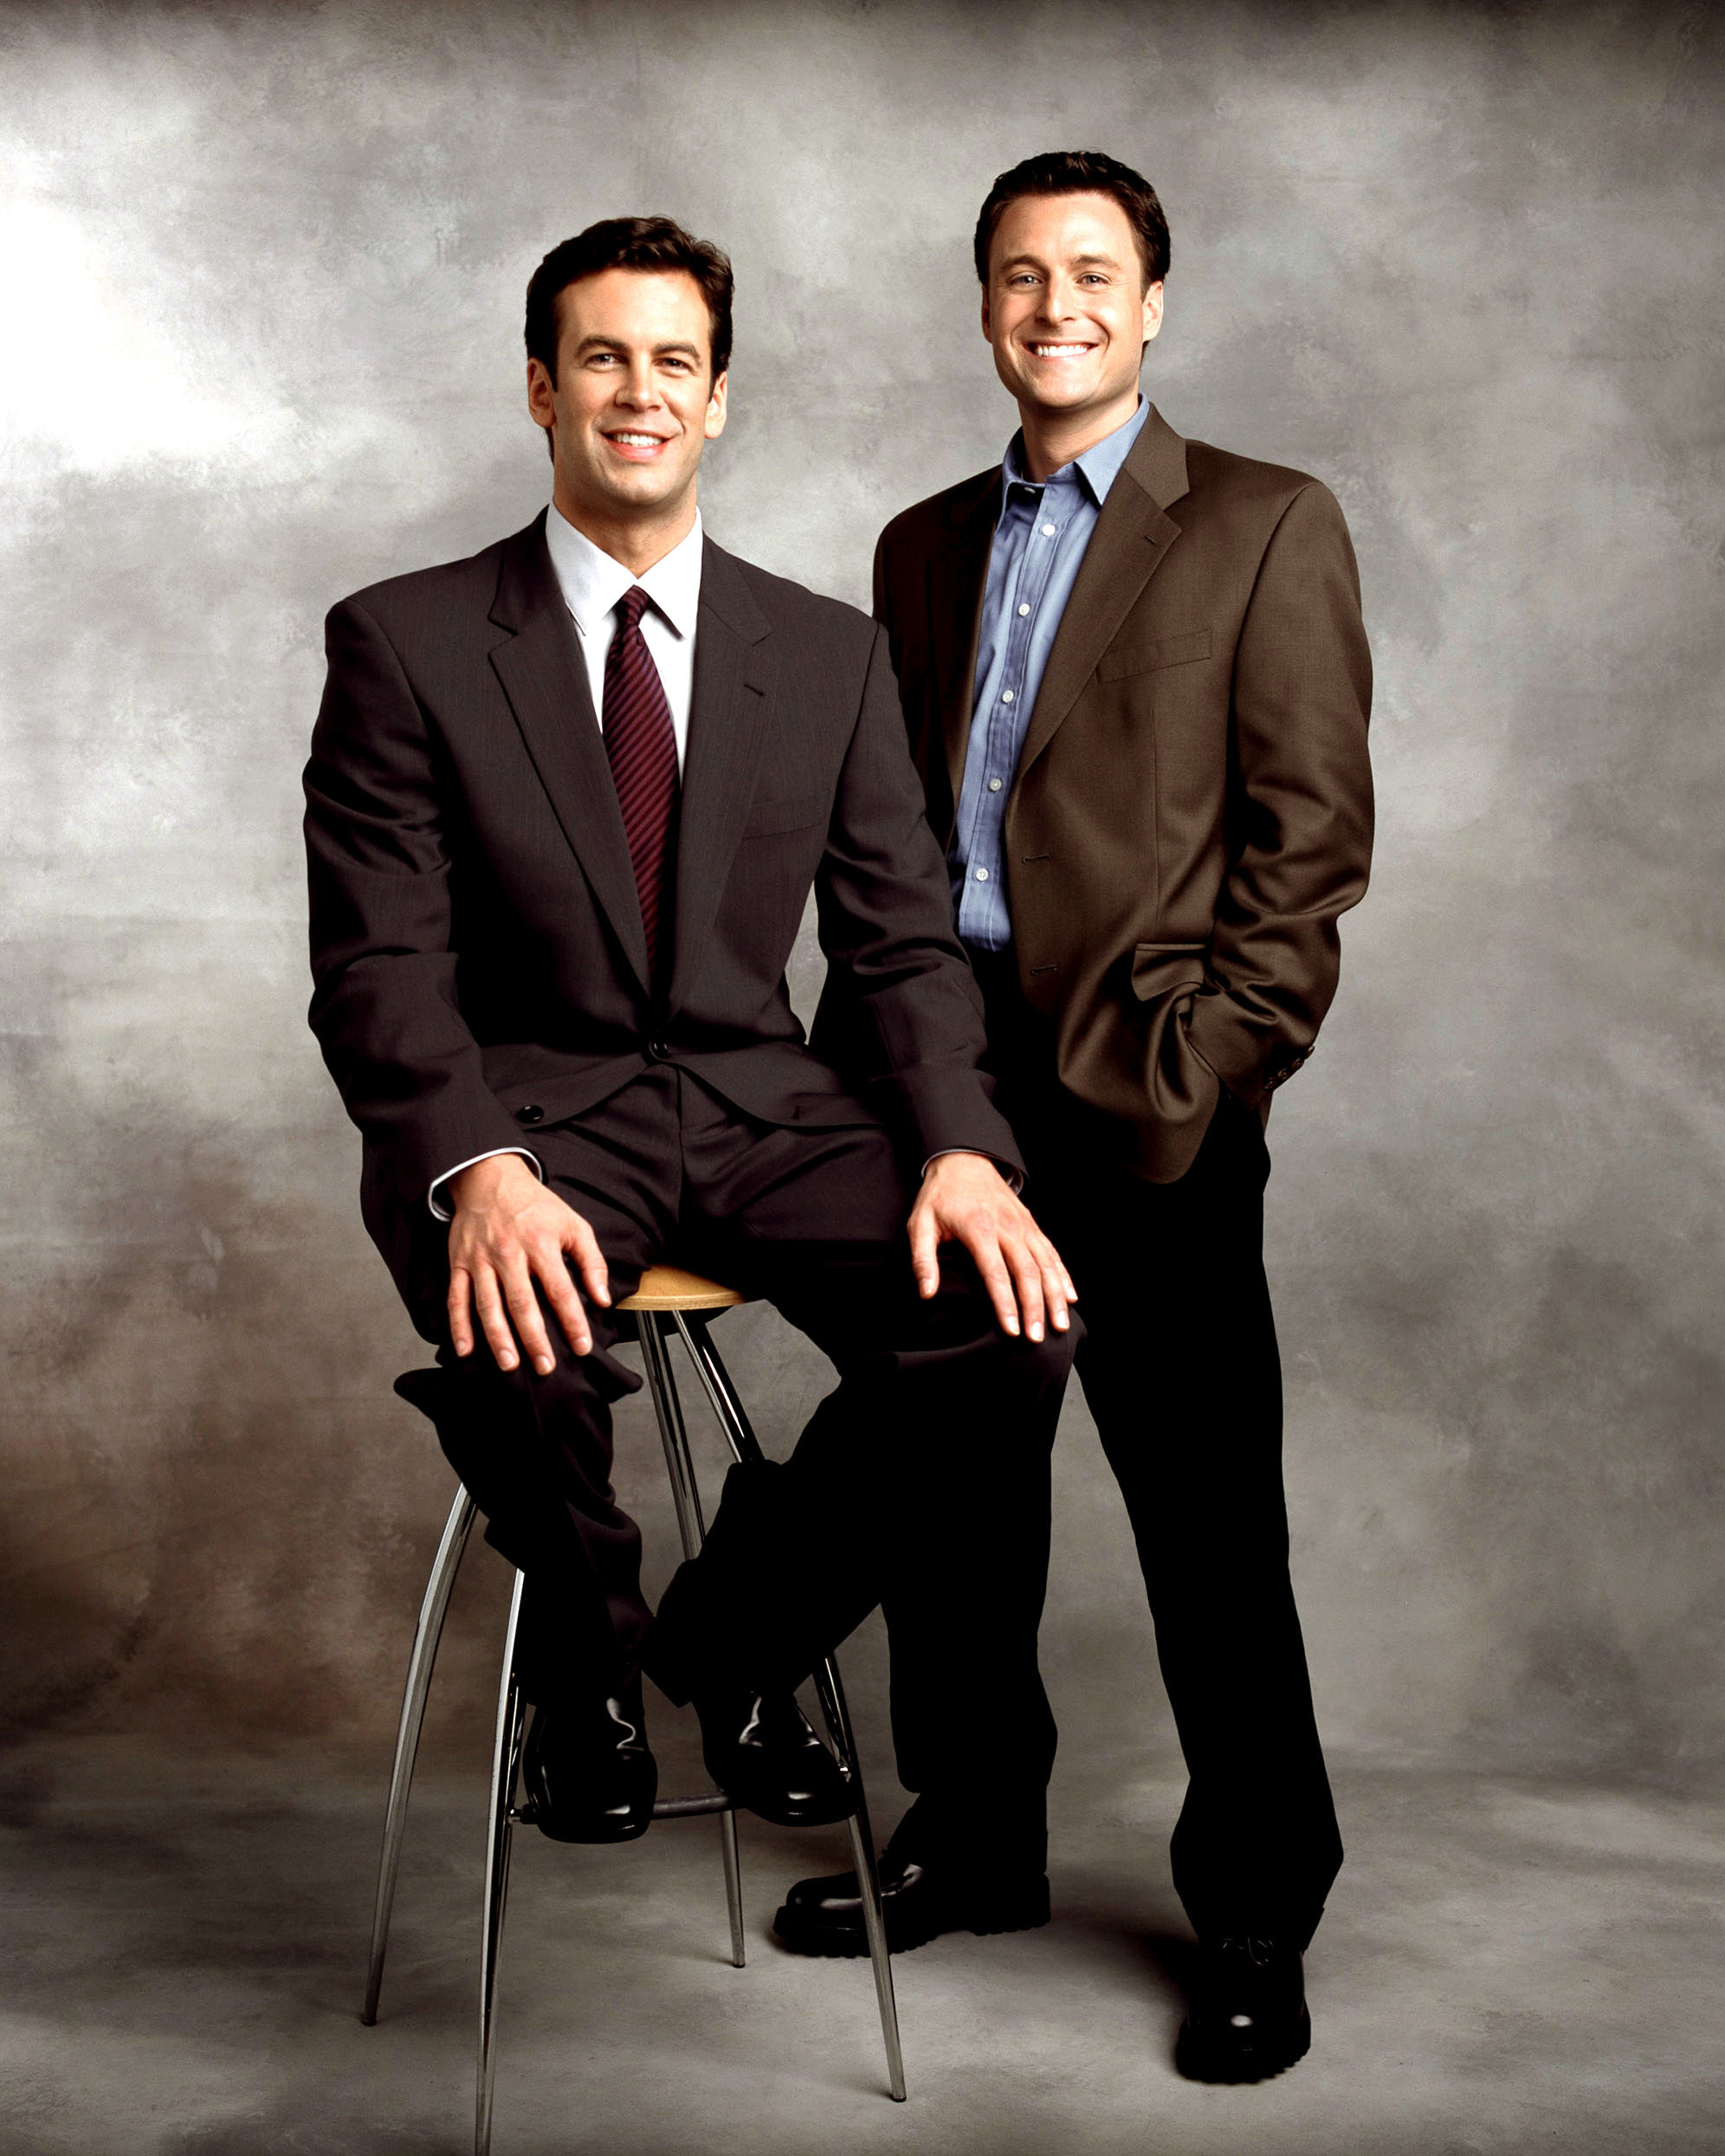 Chris Harrison (right) stands with Alex Michel, the bachelor for &quot;The Bachelor&quot; season 1